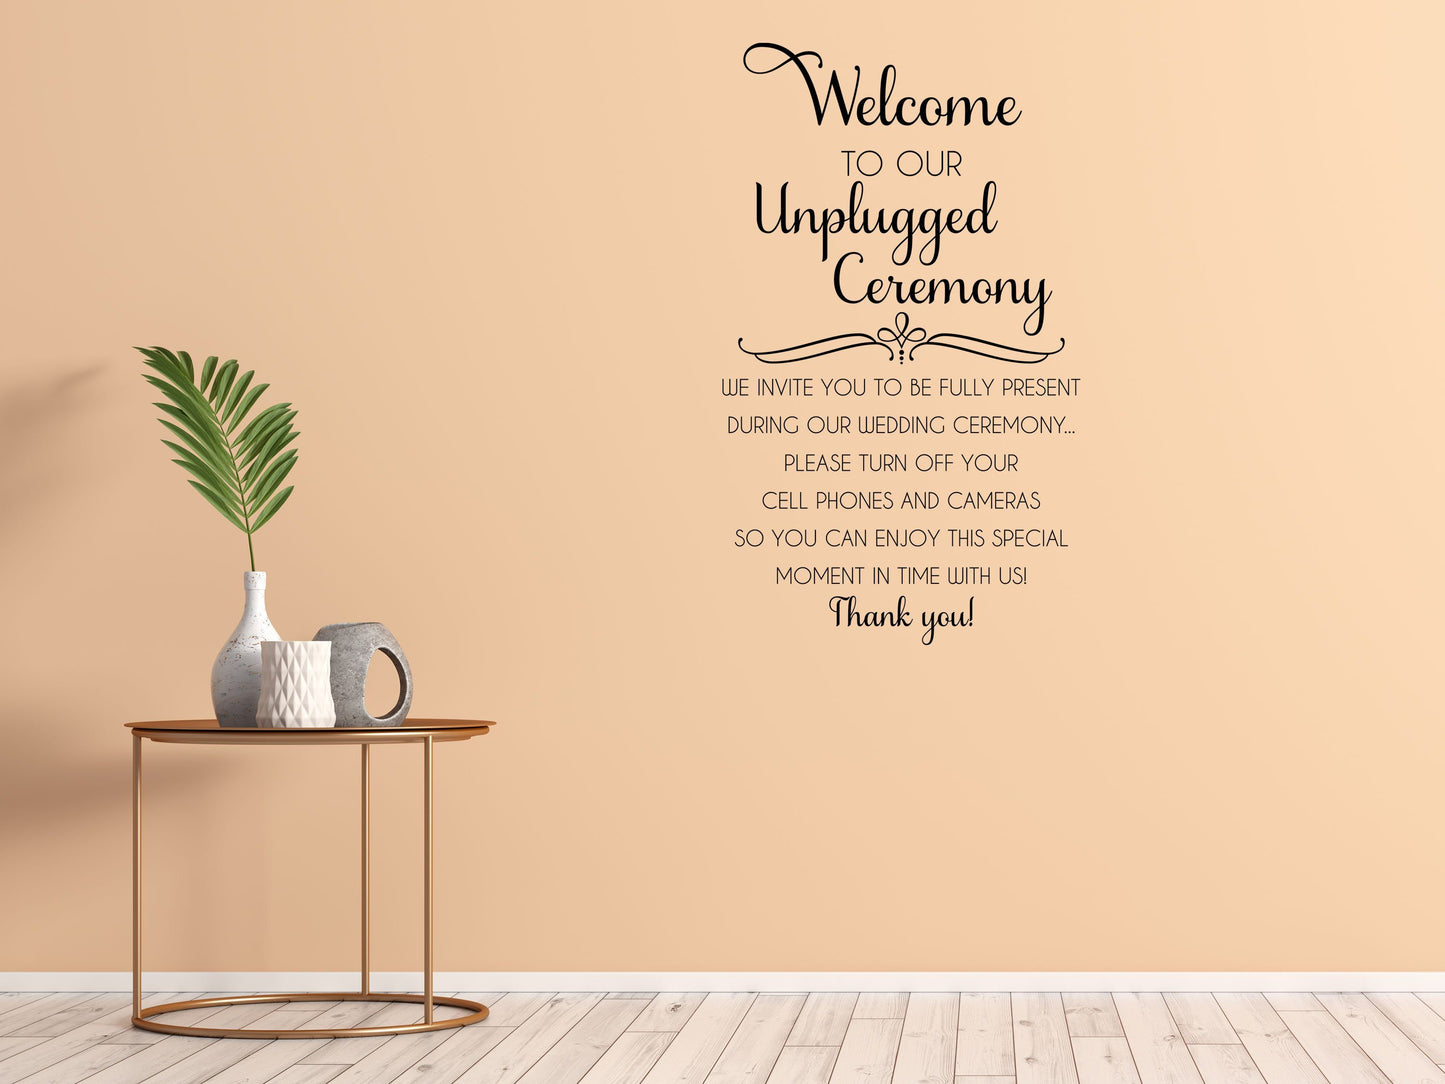 Welcome To Our Unplugged Wedding - Inspirational Wall Decals Vinyl Wall Decal Inspirational Wall Signs 